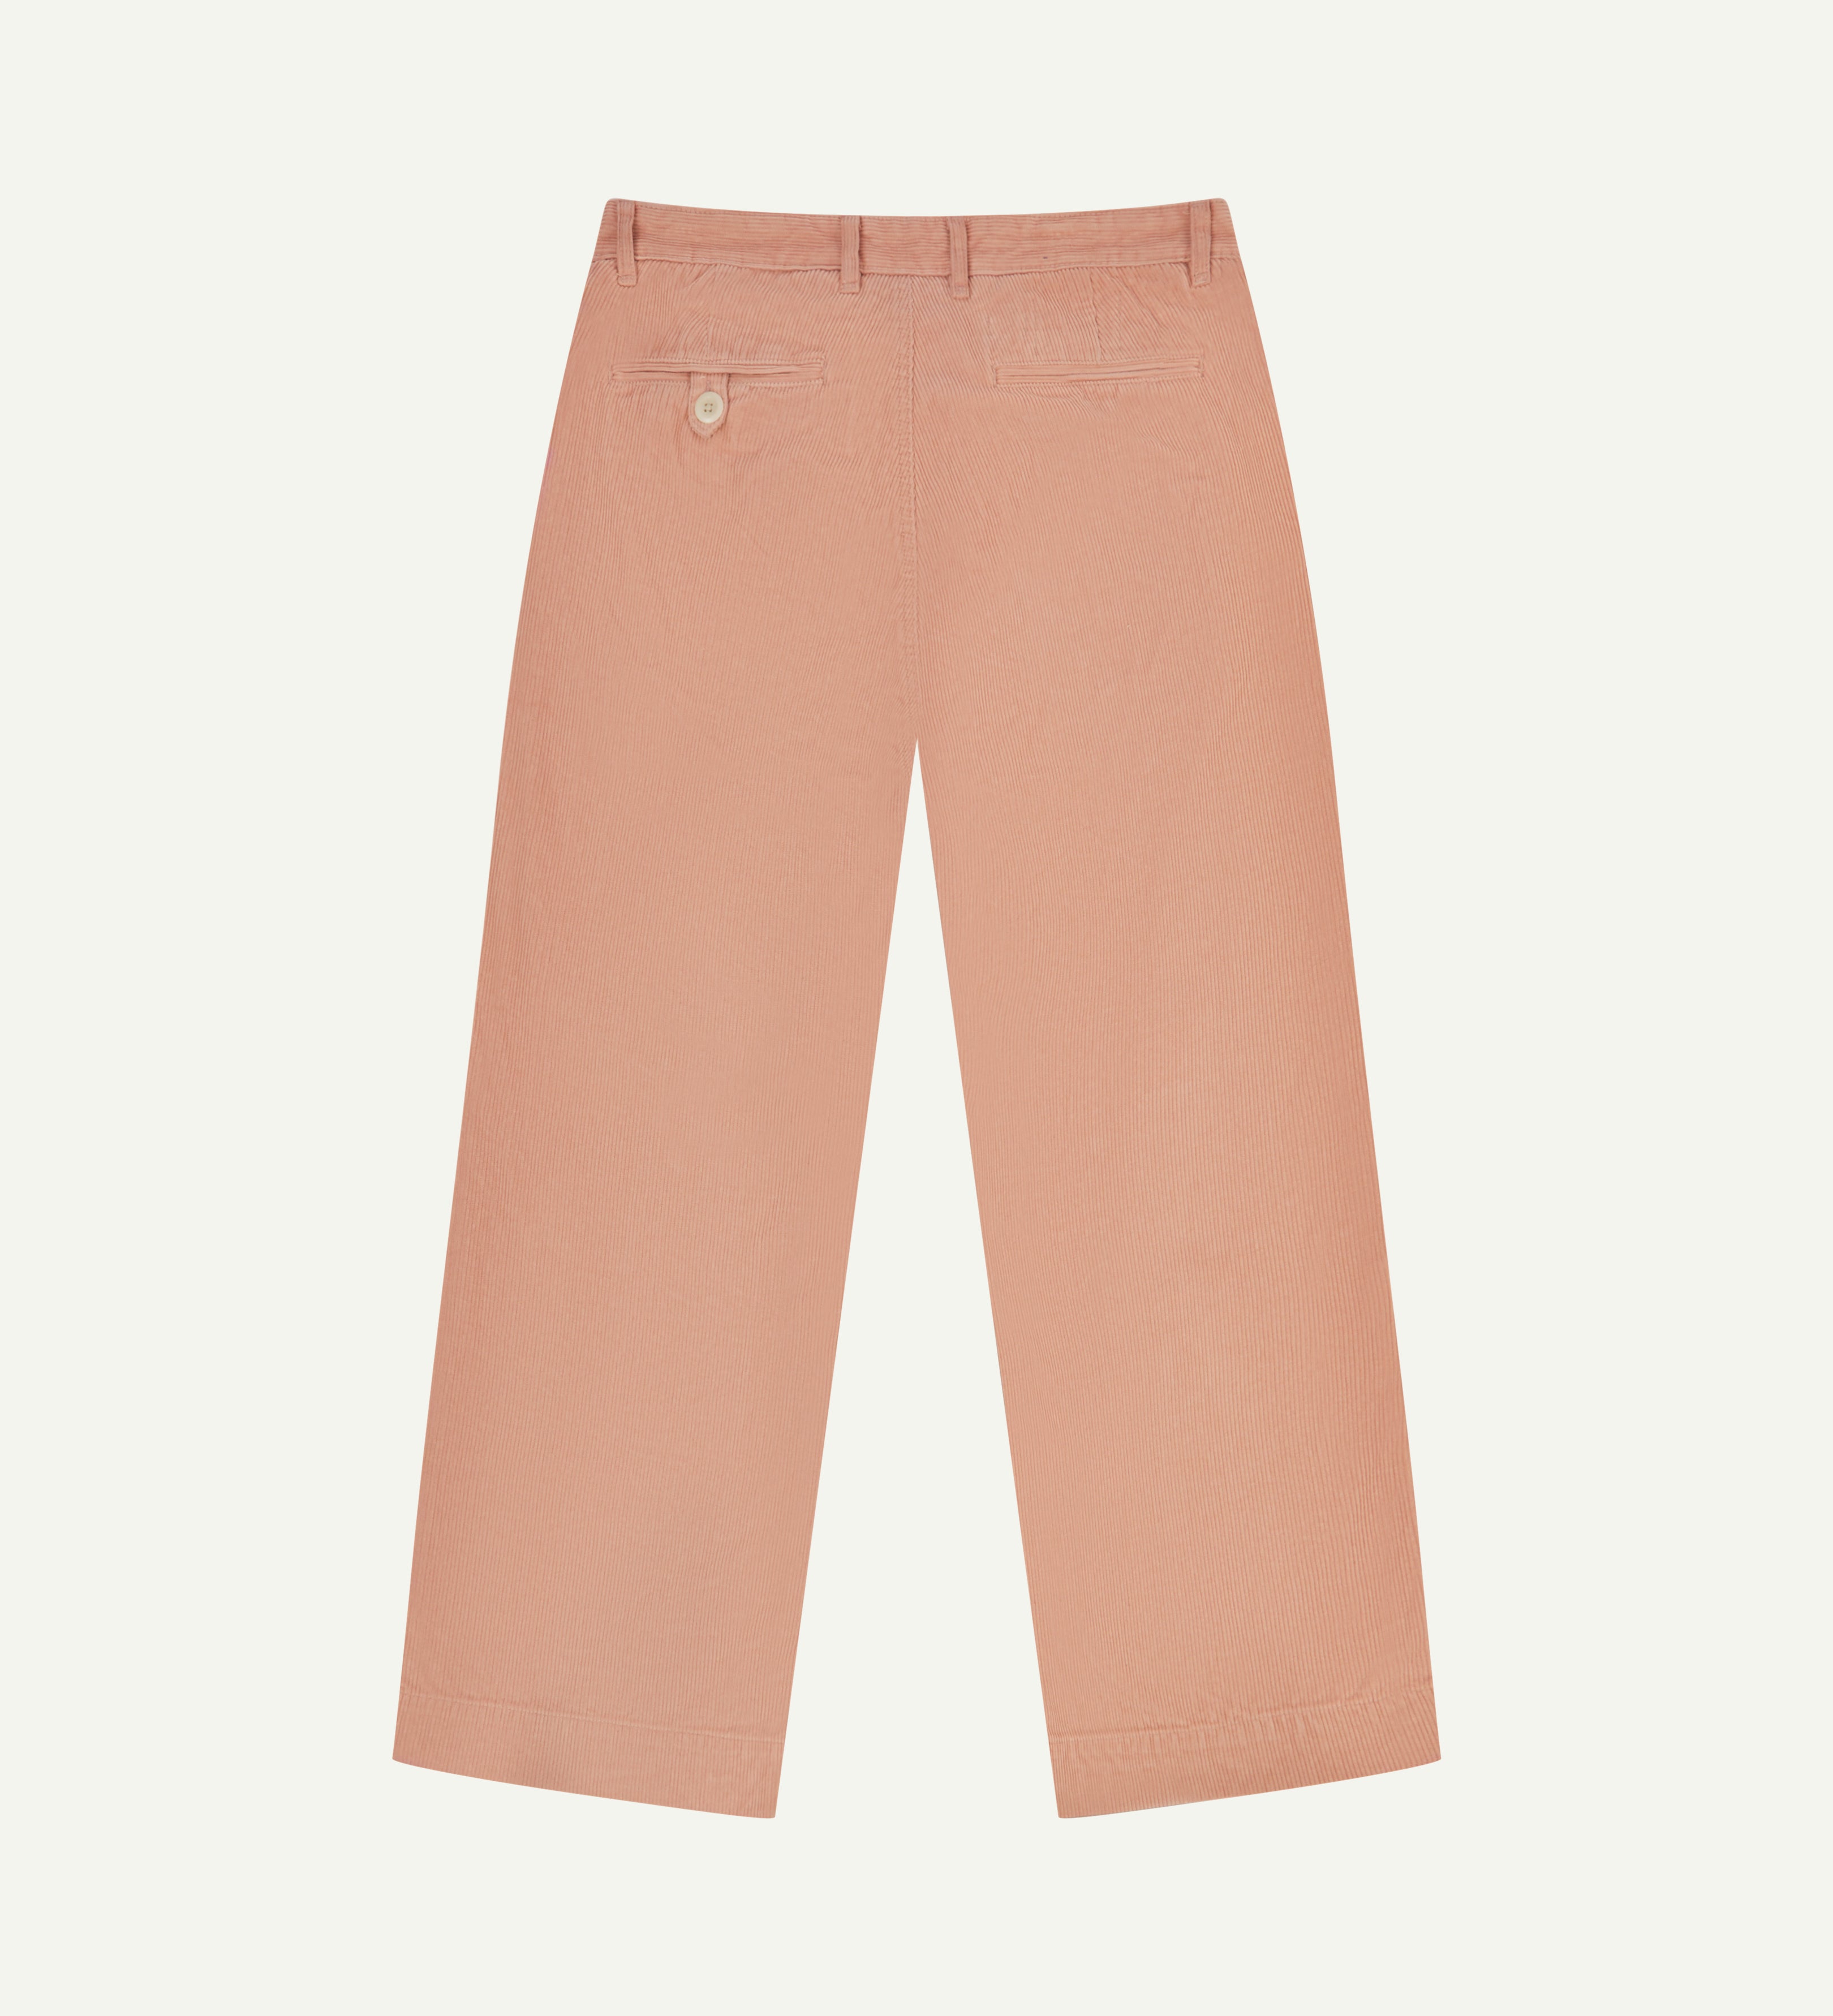 Back view of #5018 Uskees men's organic corduroy boat trousers in dusty pink showing wide leg style and buttoned back pocket.